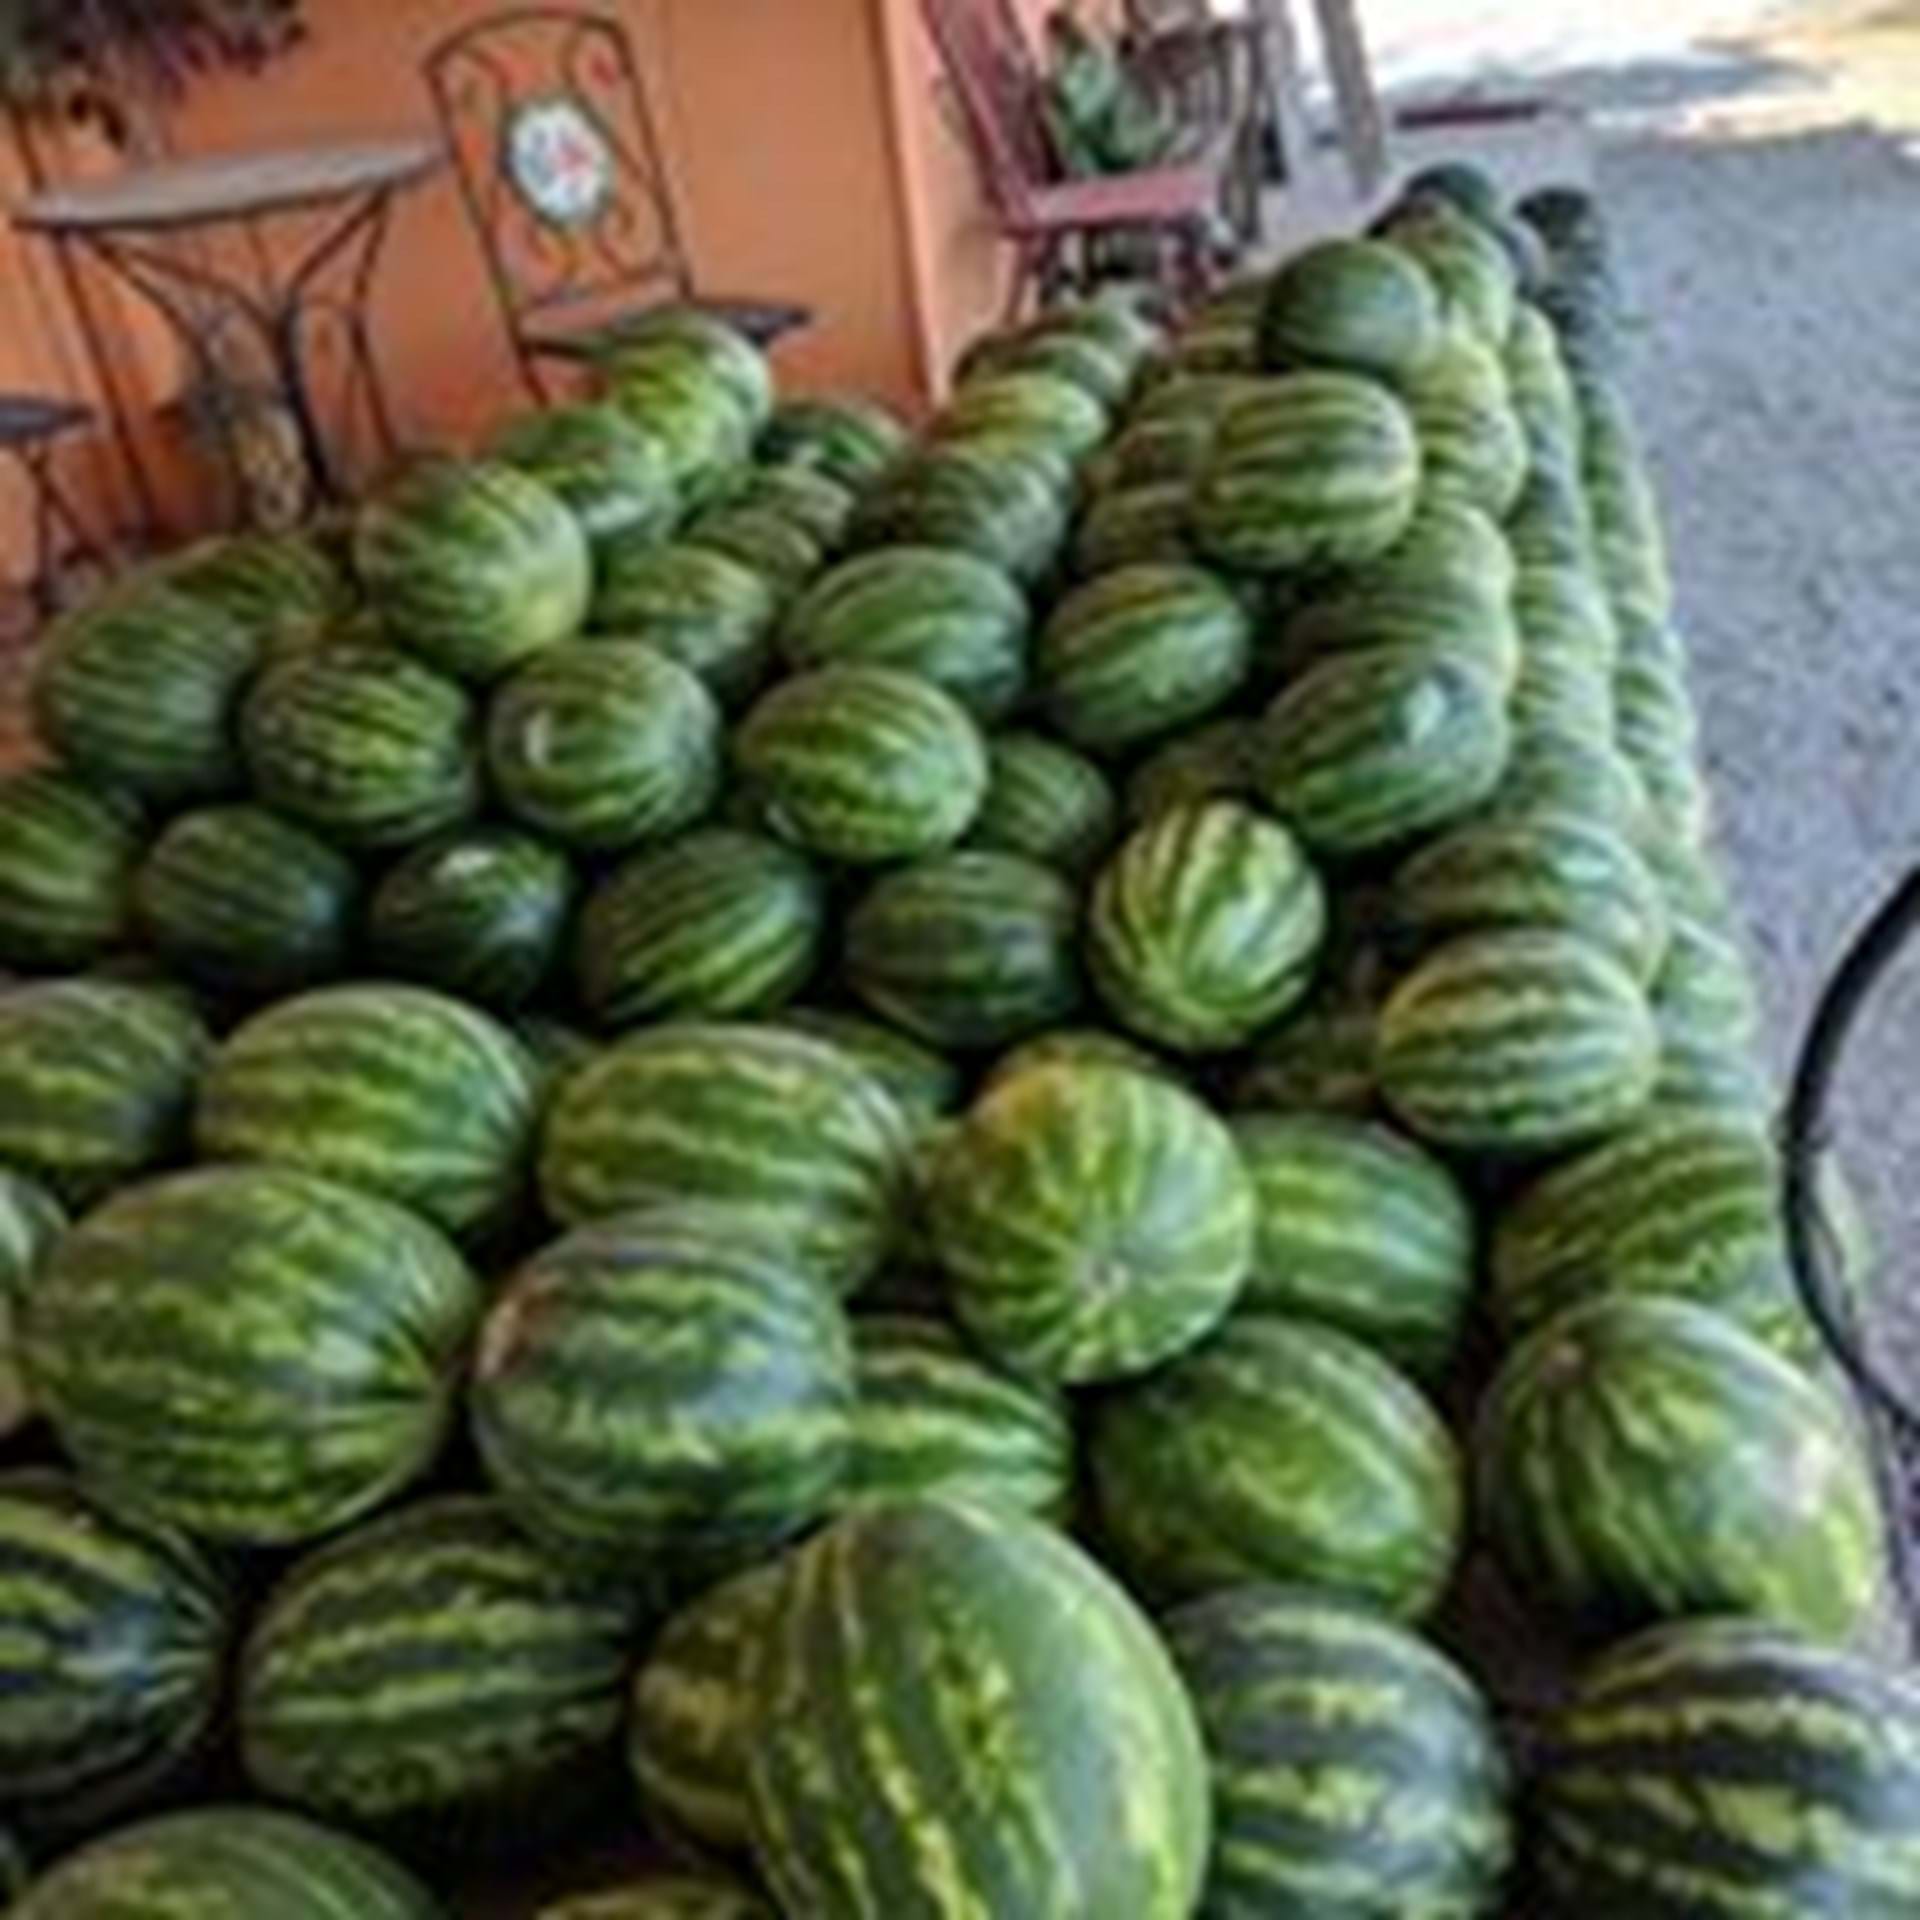 Seeded or seedless - watermelons are always a favorite!